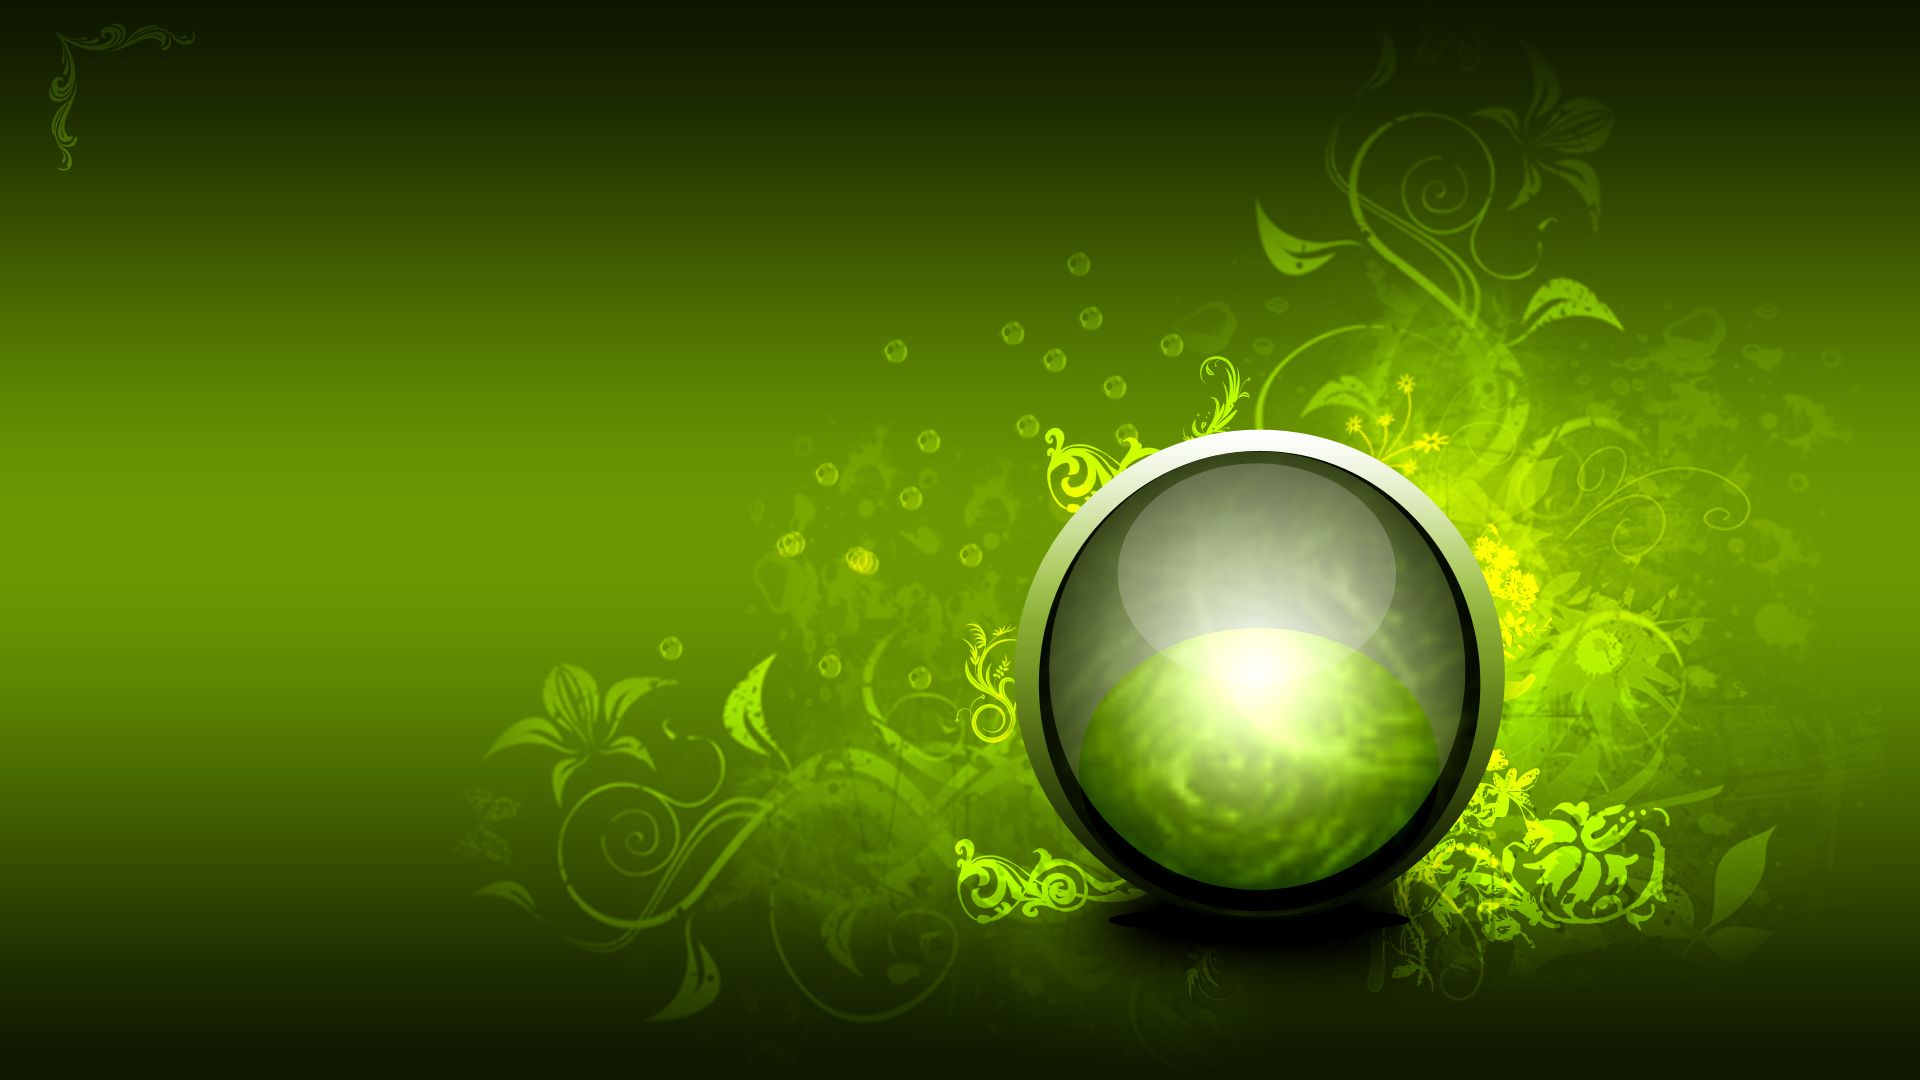 Green Theme Wallpapers - Wallpaper Cave